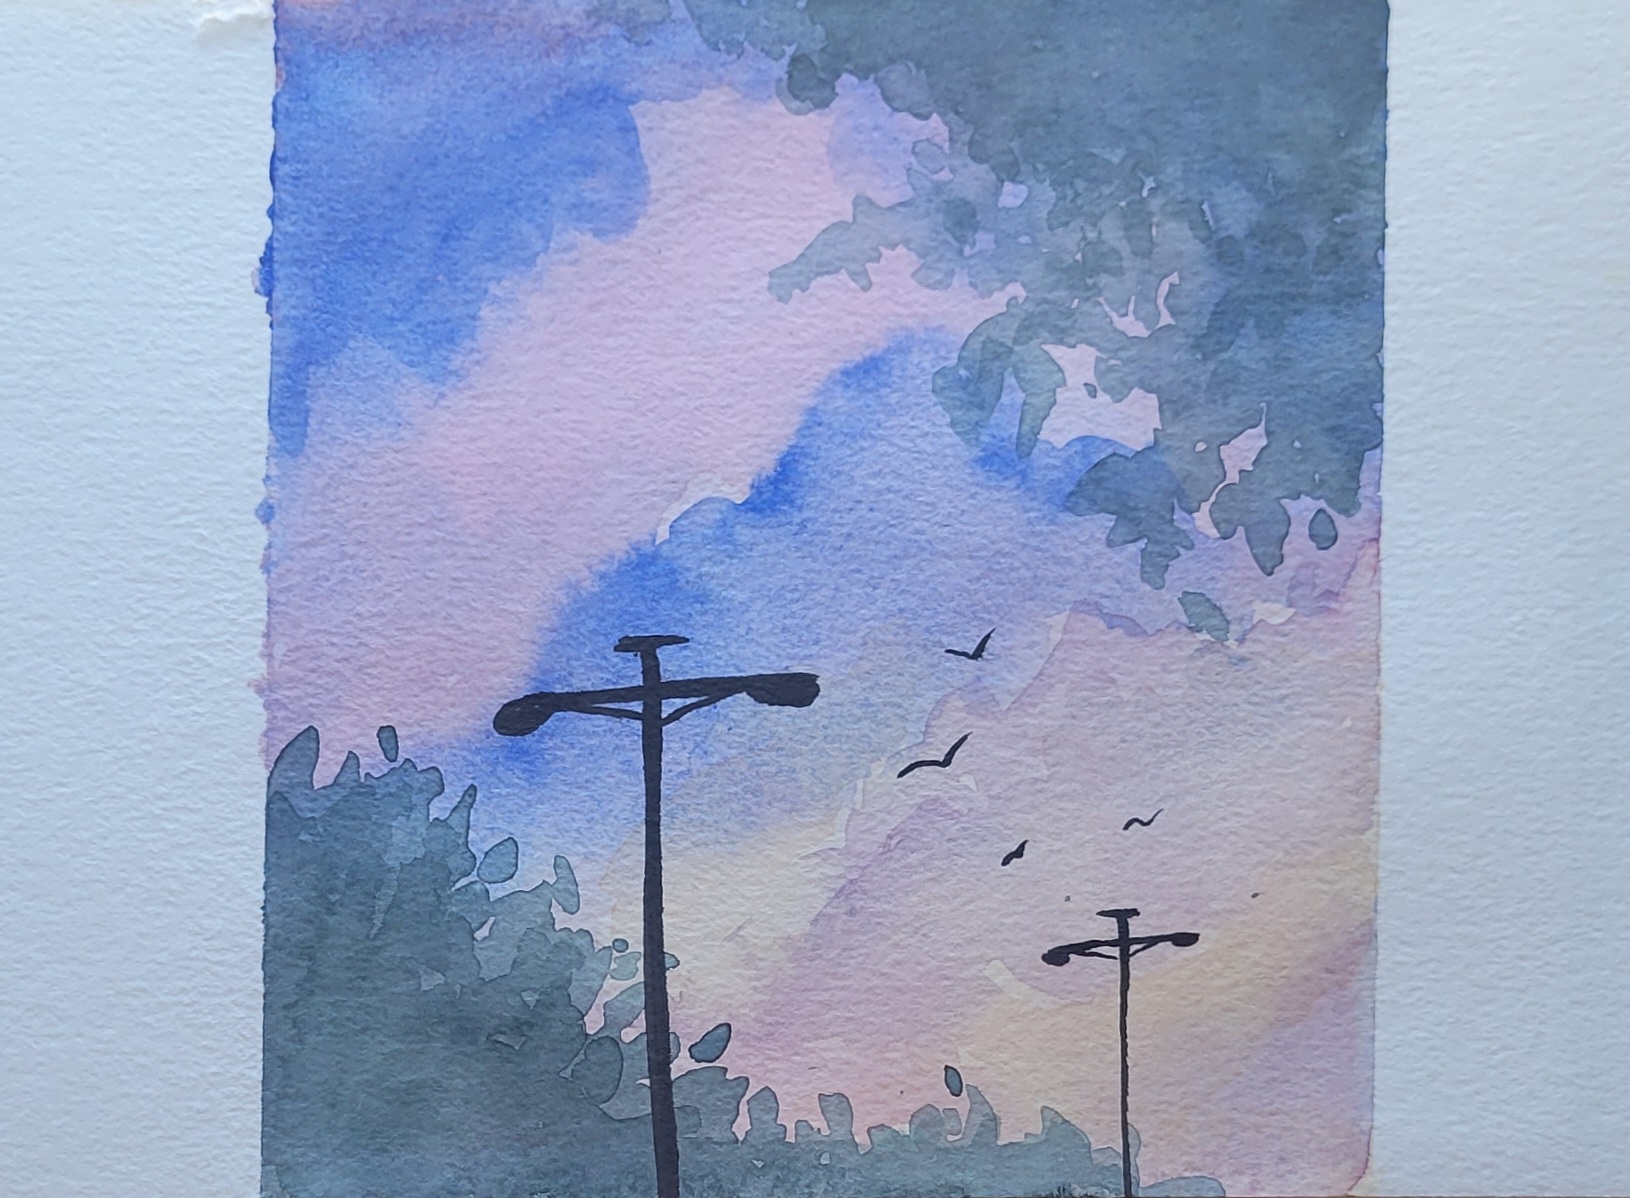 Watercolor painting of telephone poles and birds in the distance.  The background is blue and pink like a sky towards the end of sunset with the green leaves of two trees in two corners diagonally across from each other.